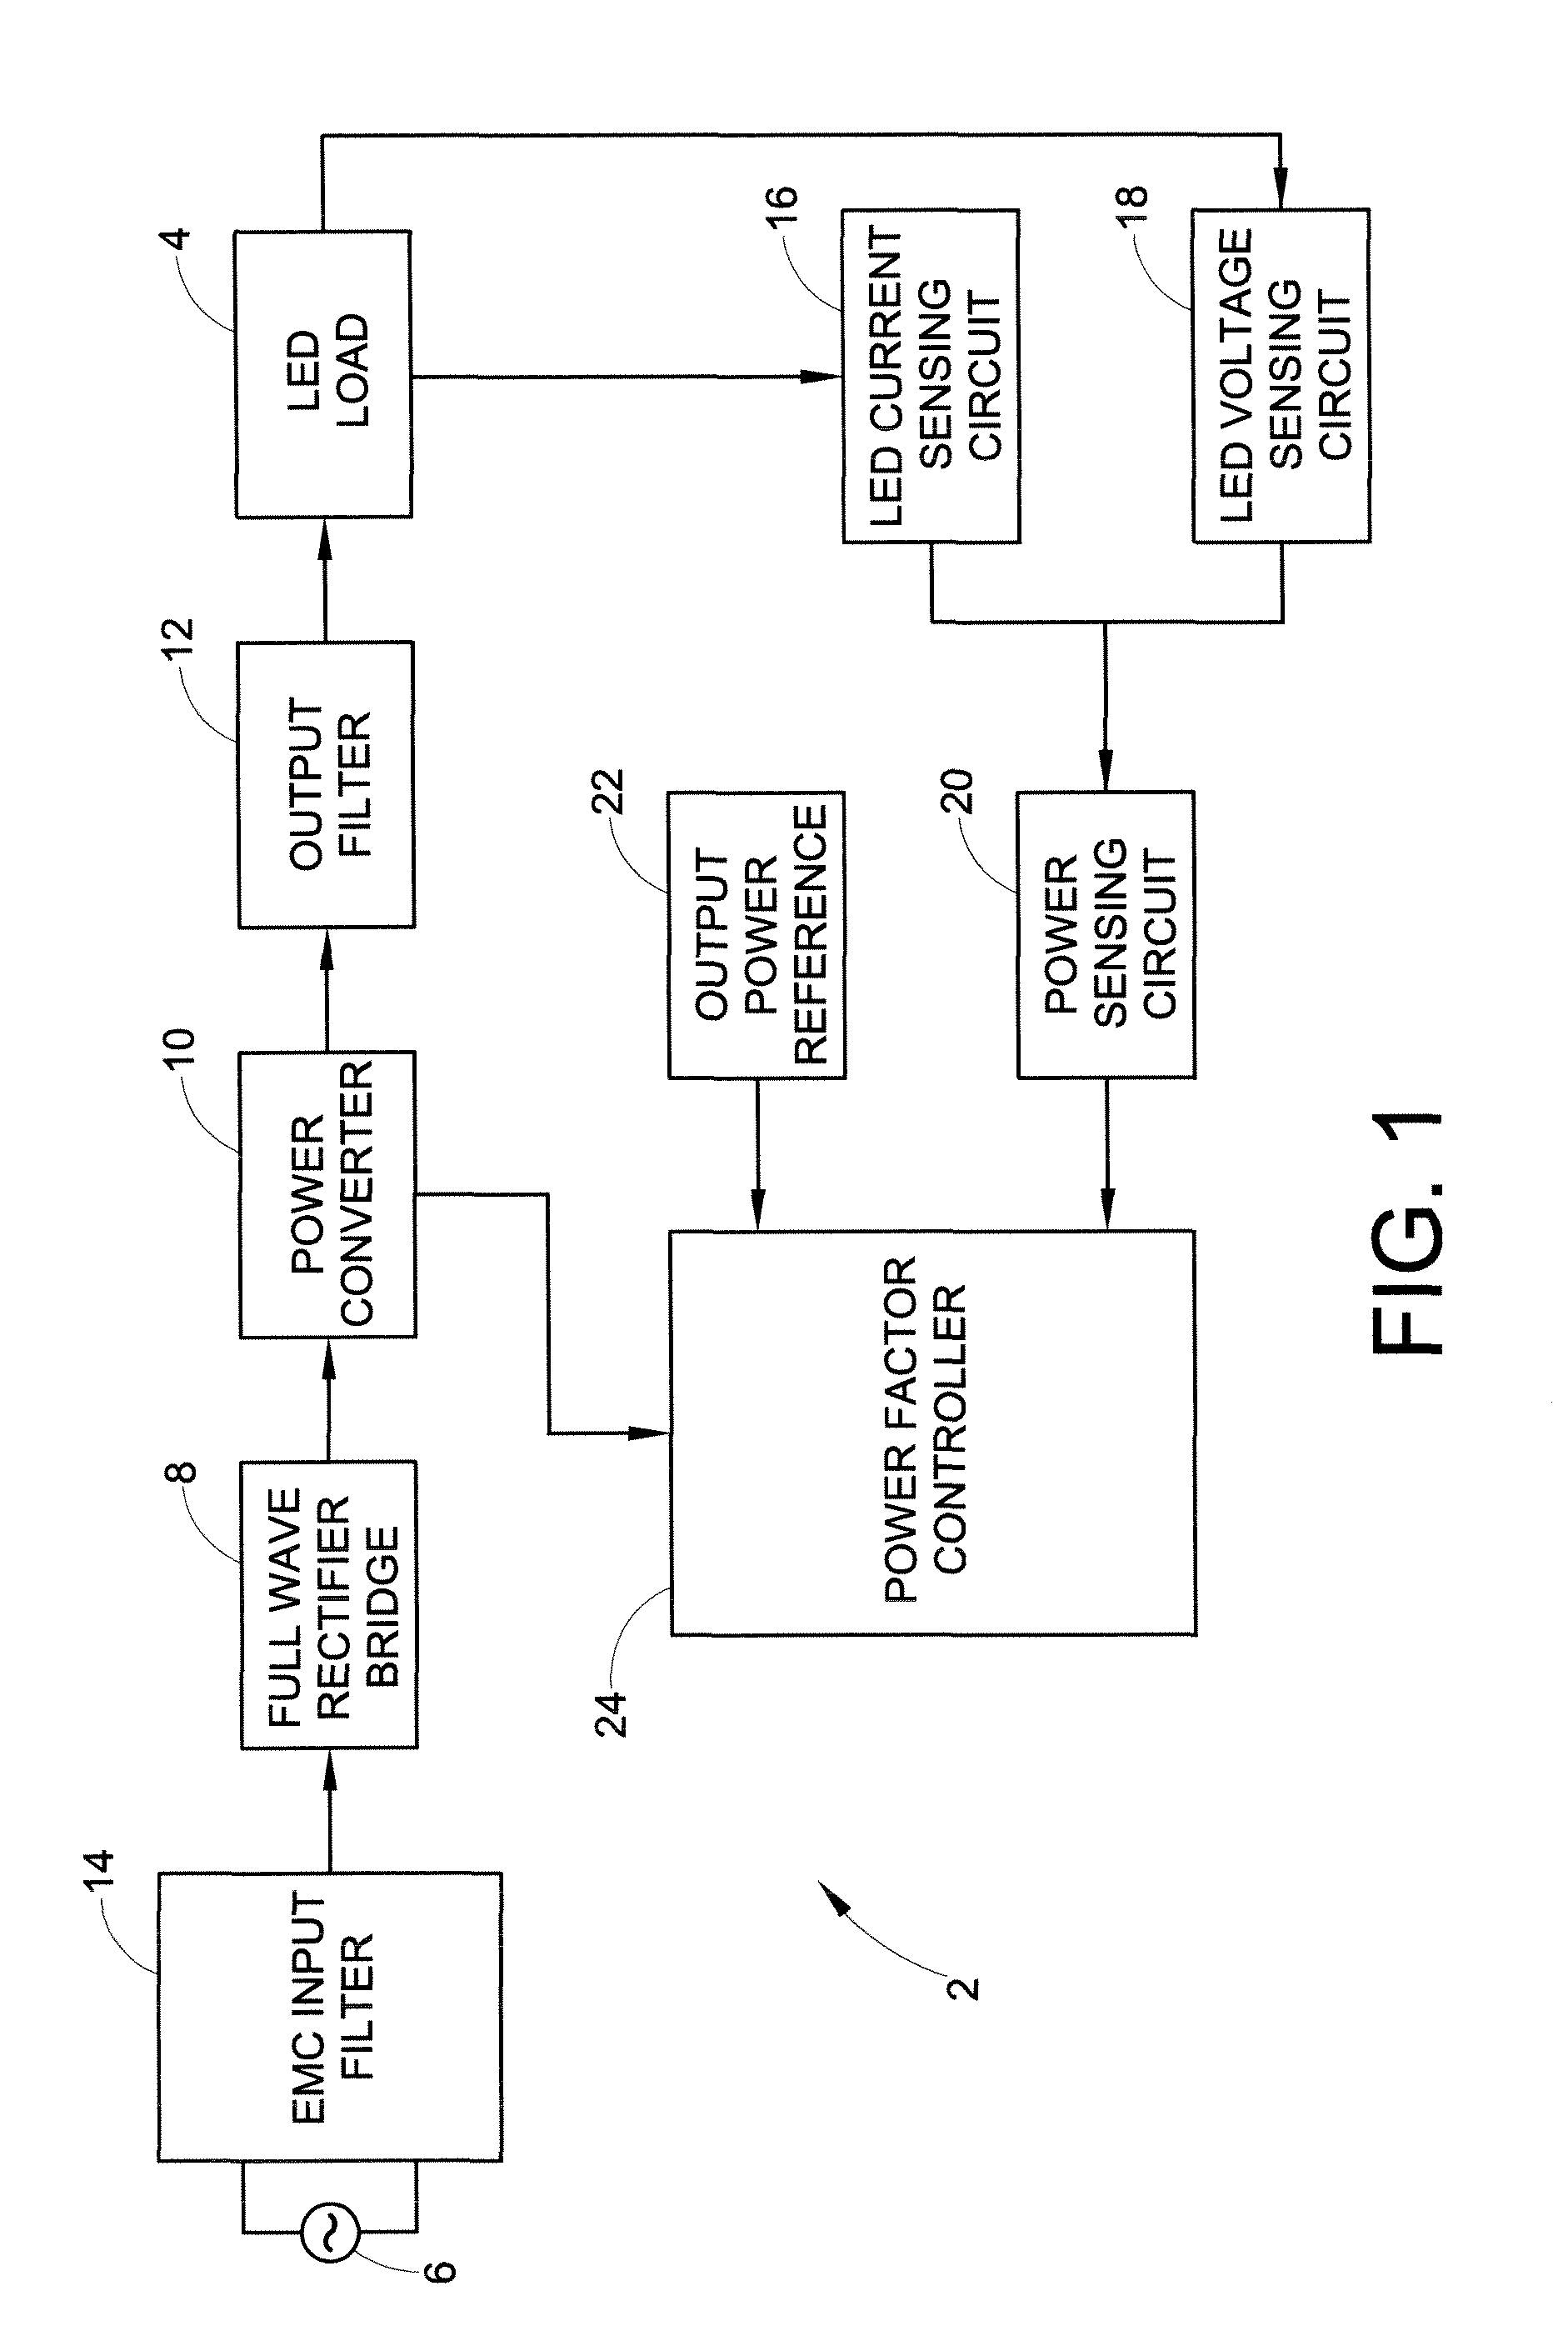 Power control circuit and method